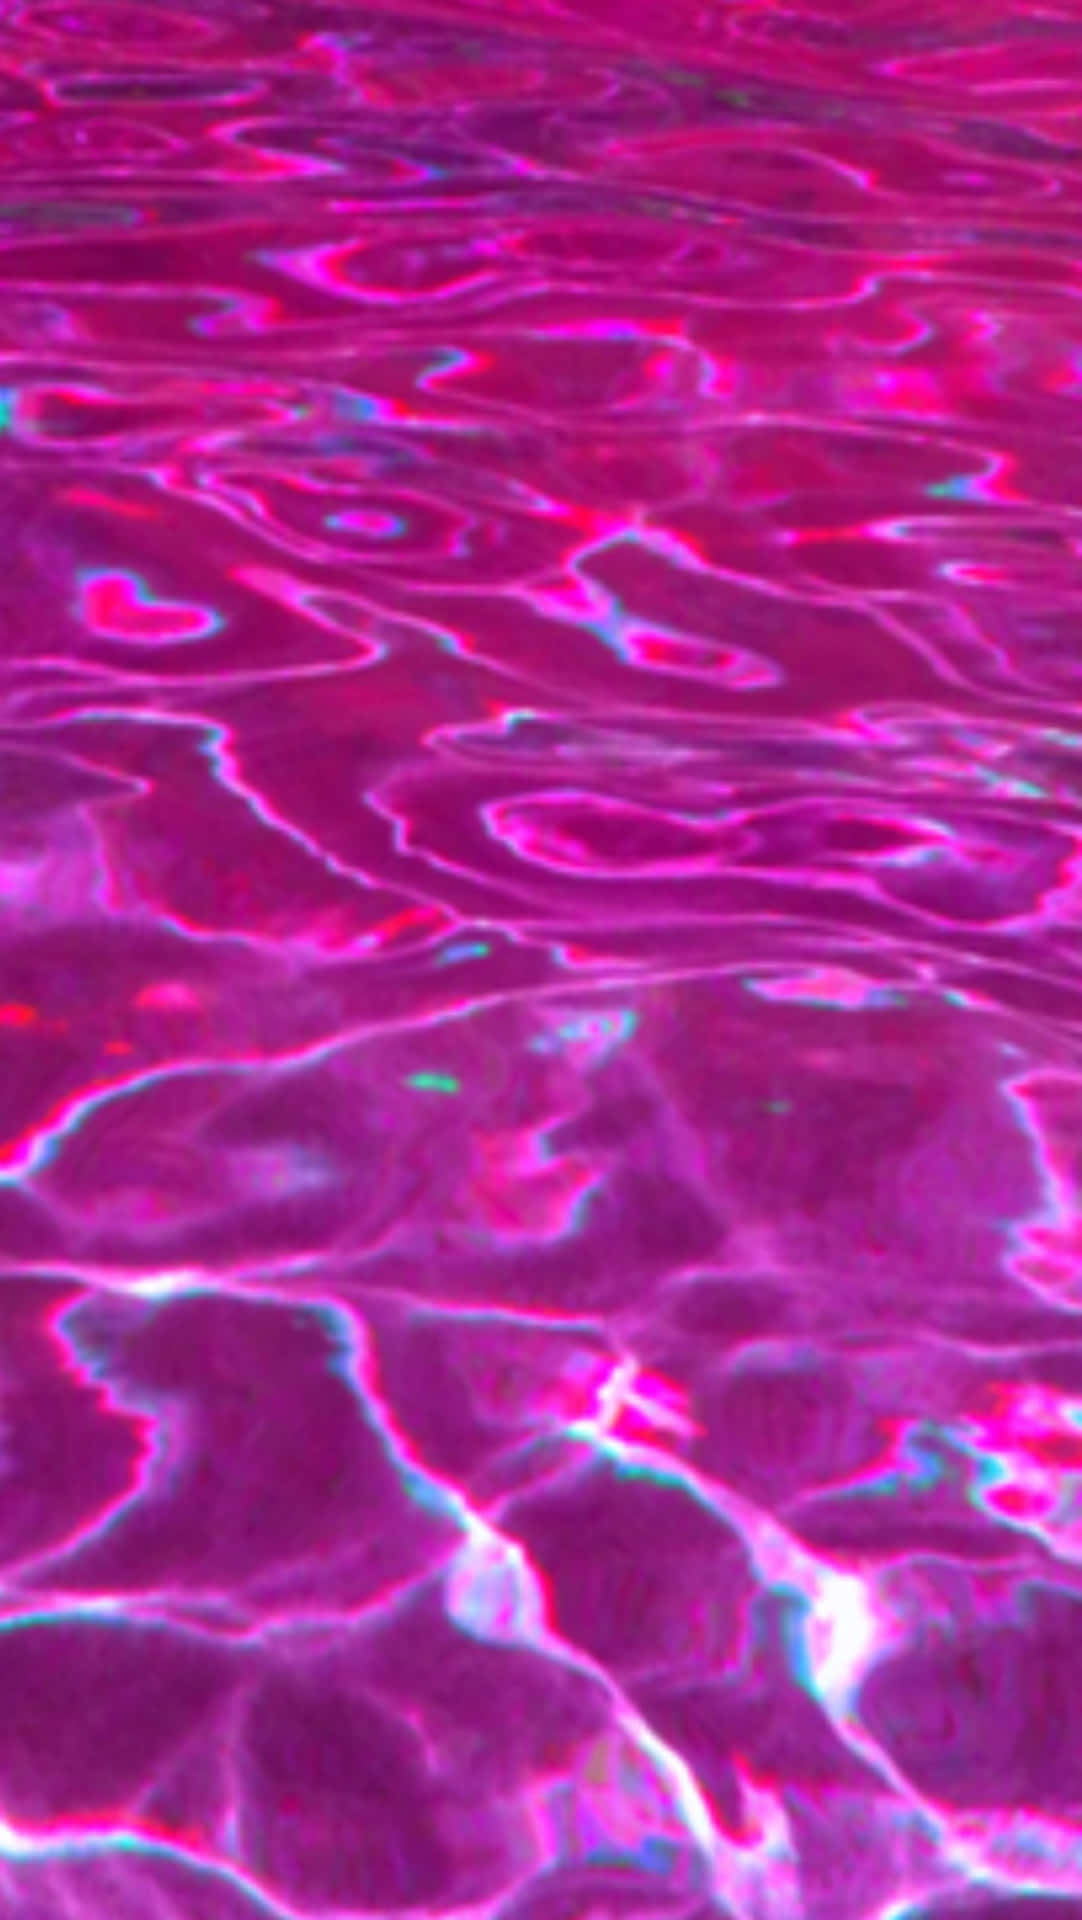 Download Pink Water Surface With Reflections Wallpaper | Wallpapers.com